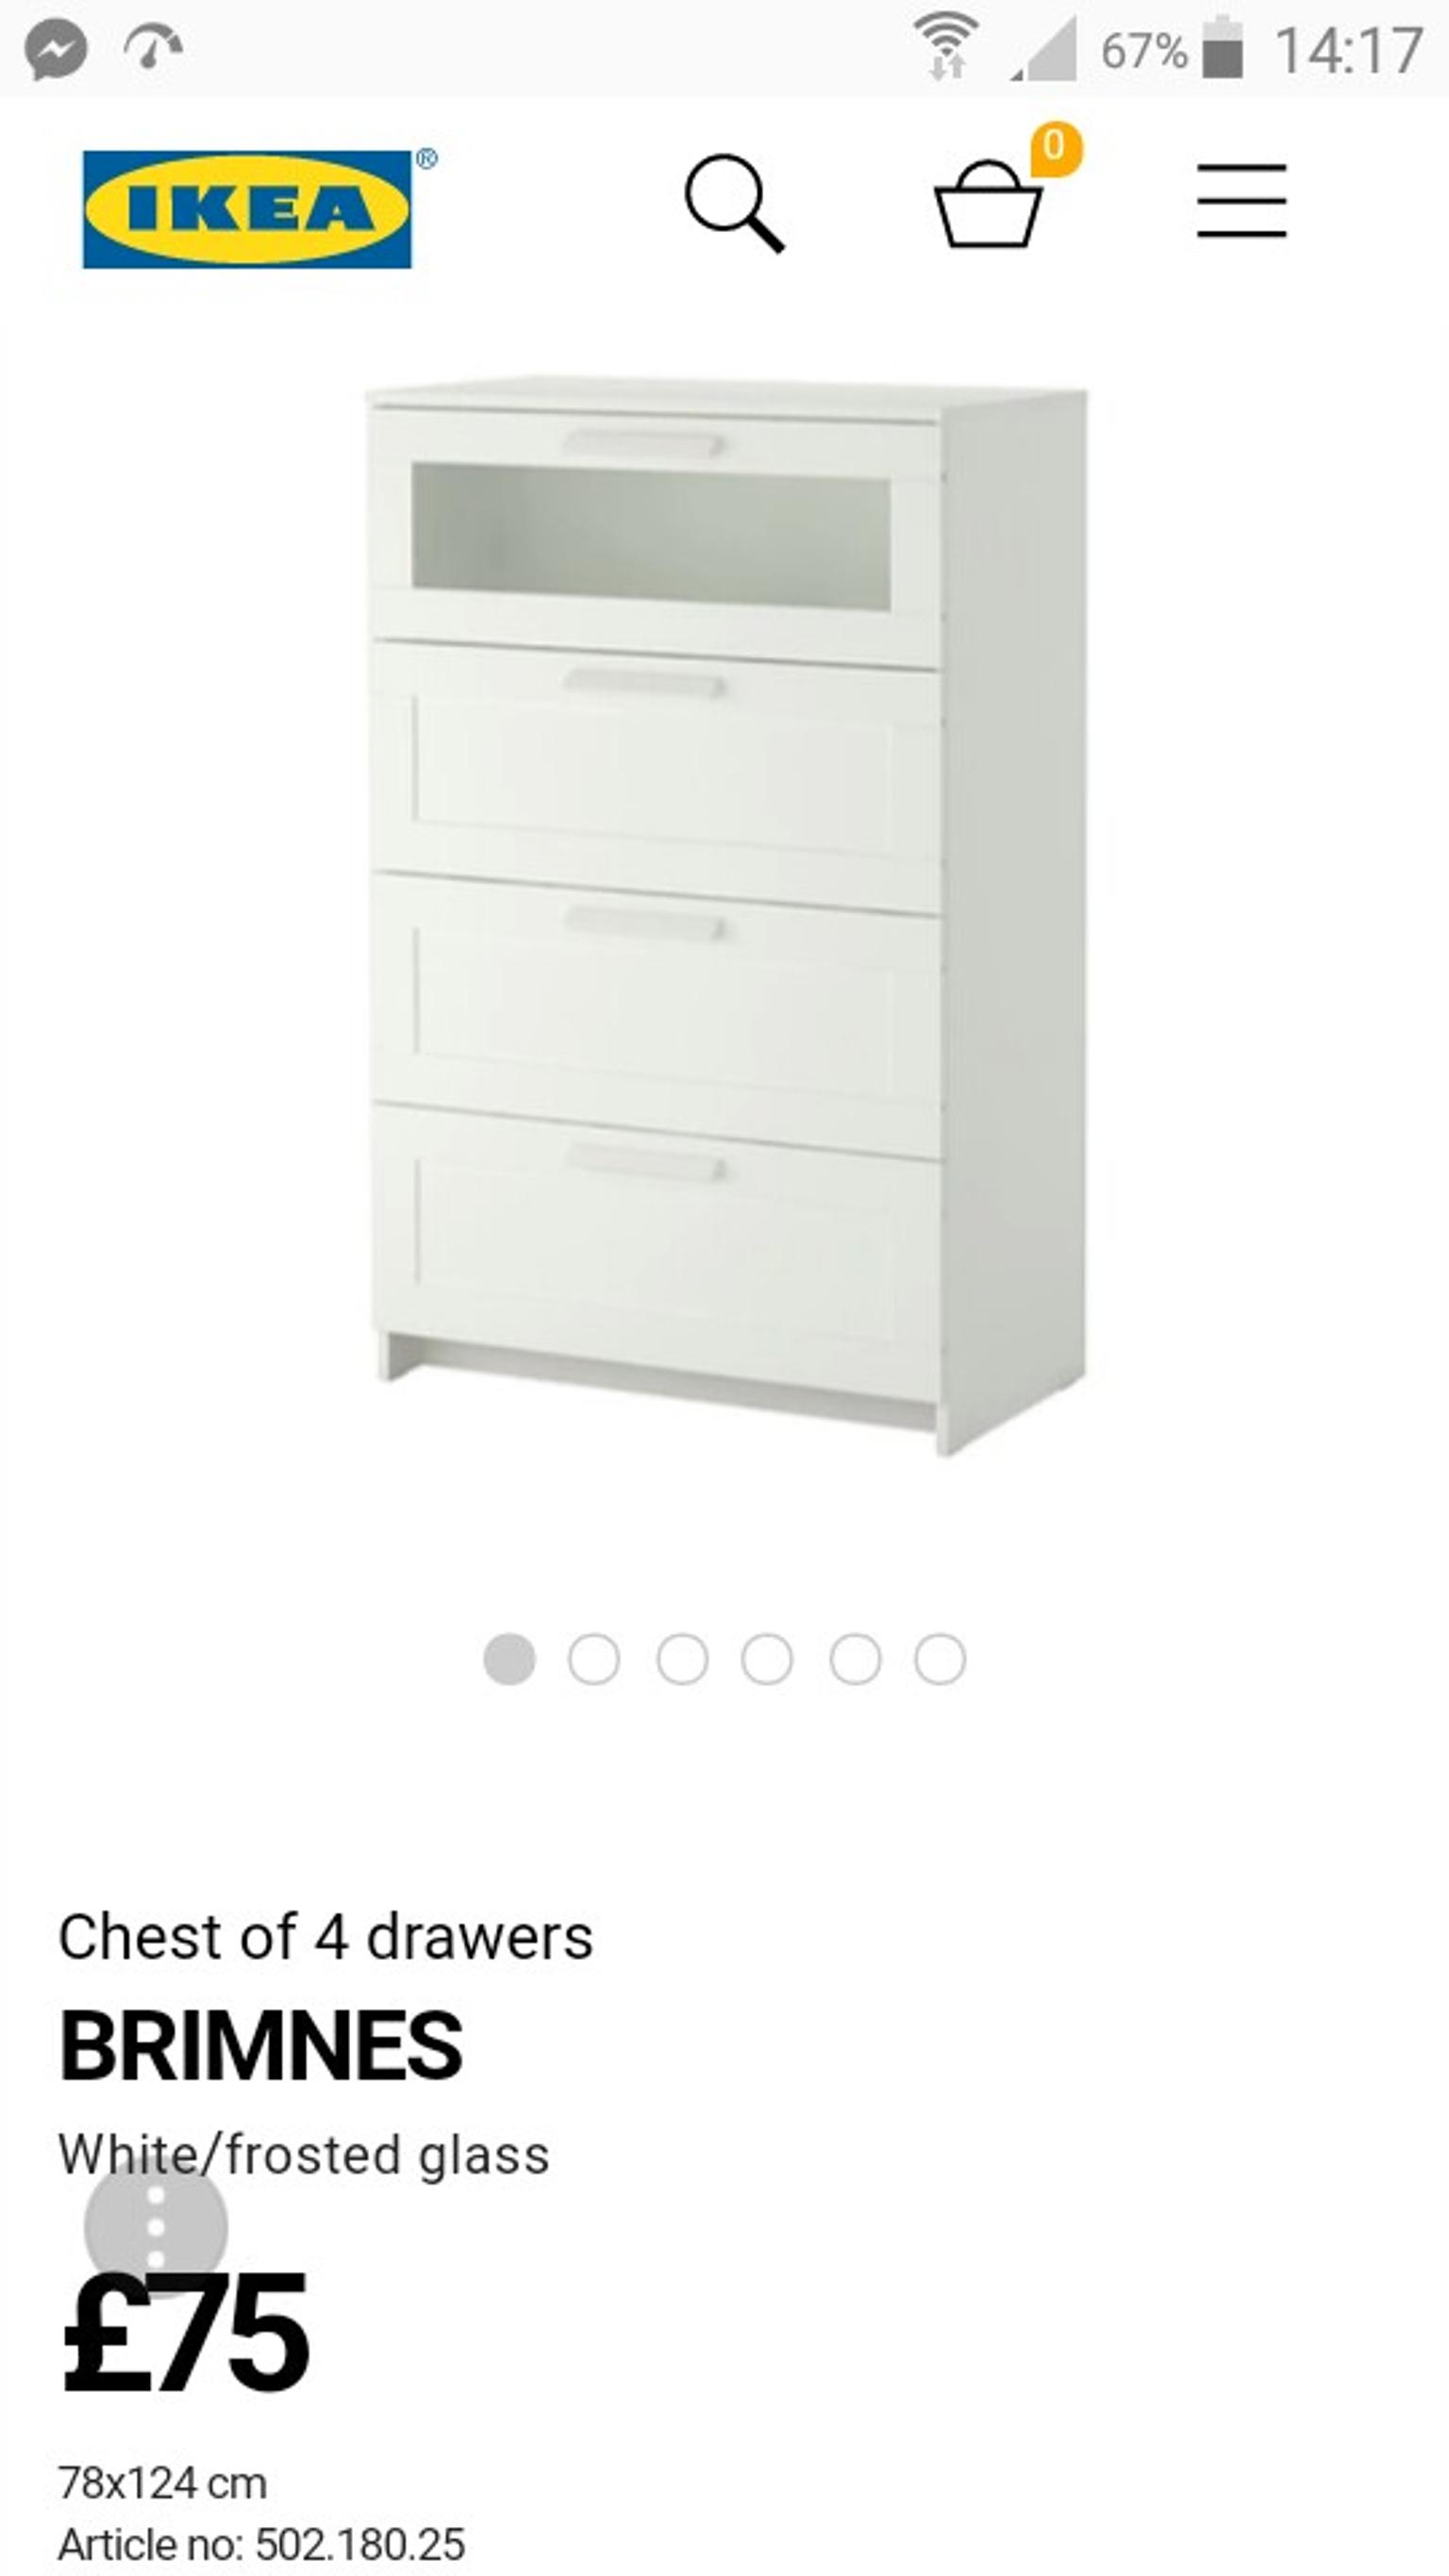 Ikea Brimnes Drawers In Hp1 Hempstead For 30 00 For Sale Shpock